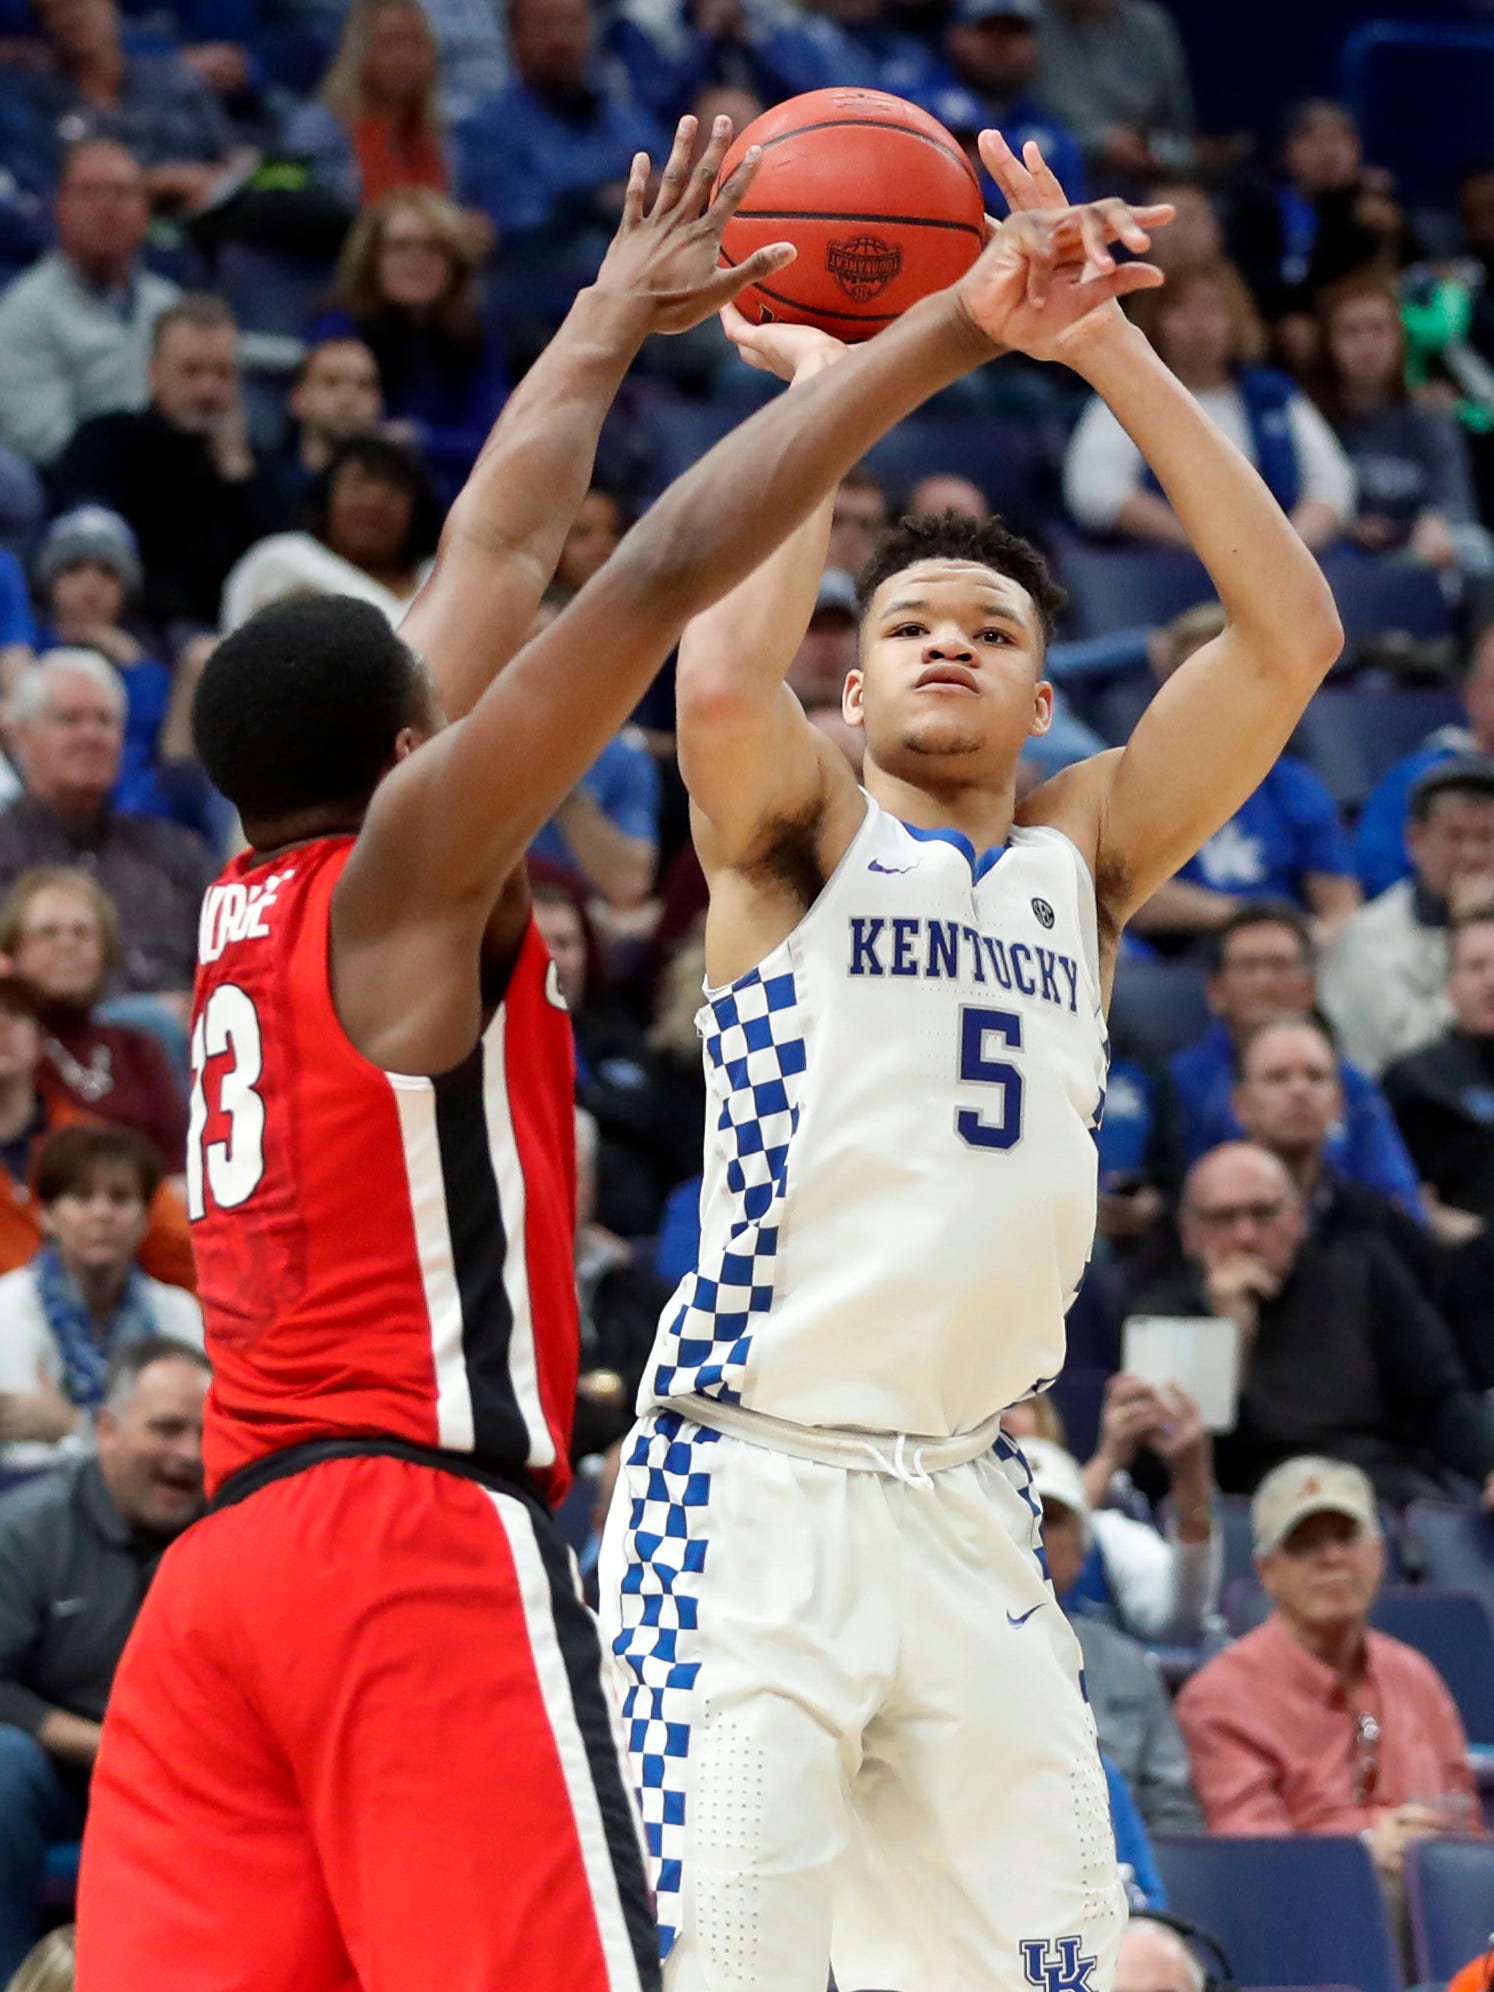 11. Charlotte Hornets: Kevin Knox, F, Fr., Kentucky. He has plenty of untapped potential and didn't get to develop fully with the oodles of talent around him at Kentucky. He can play both forward spots, but didn’t have an excellent shooting year, which could change as he makes the jump to the NBA. At 6-9, he's a bit undersized as a power forward, but he'll find sweet spot on the floor with the Hornets.